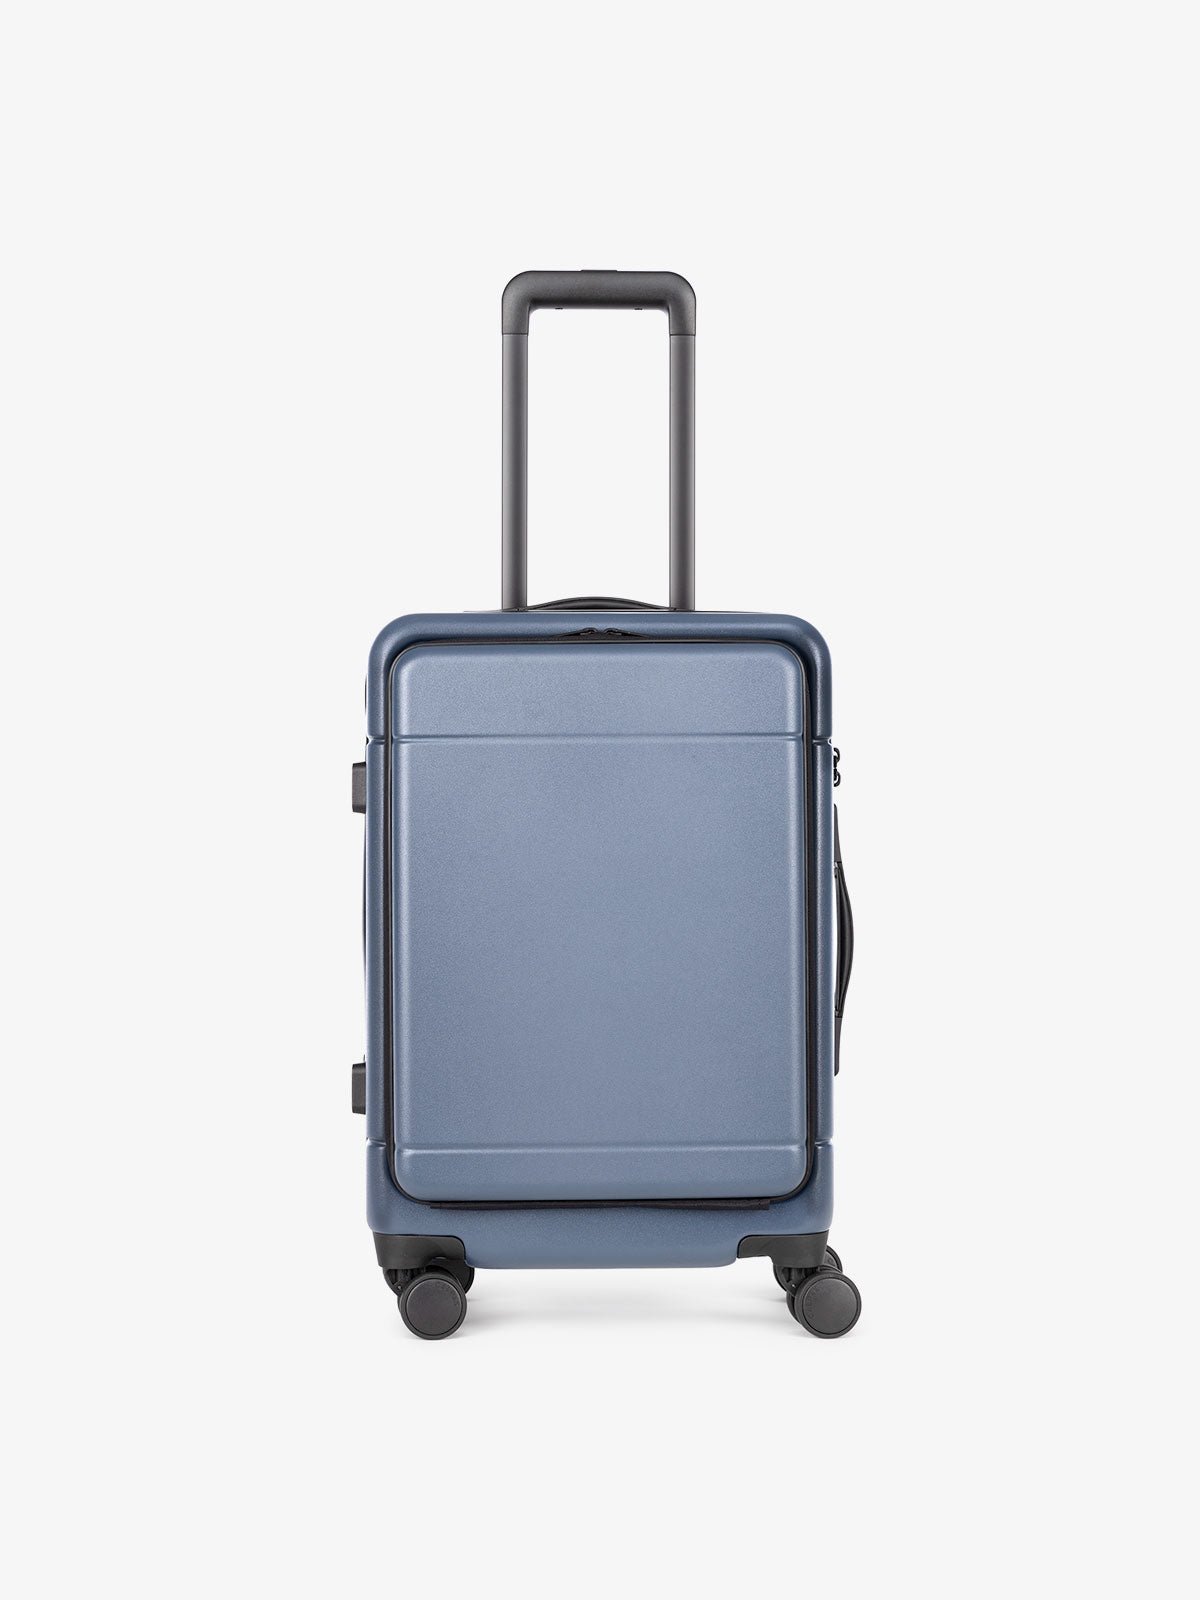 CALPAK Hue hardside carry-on suitcase with laptop compartment in blue atlantic